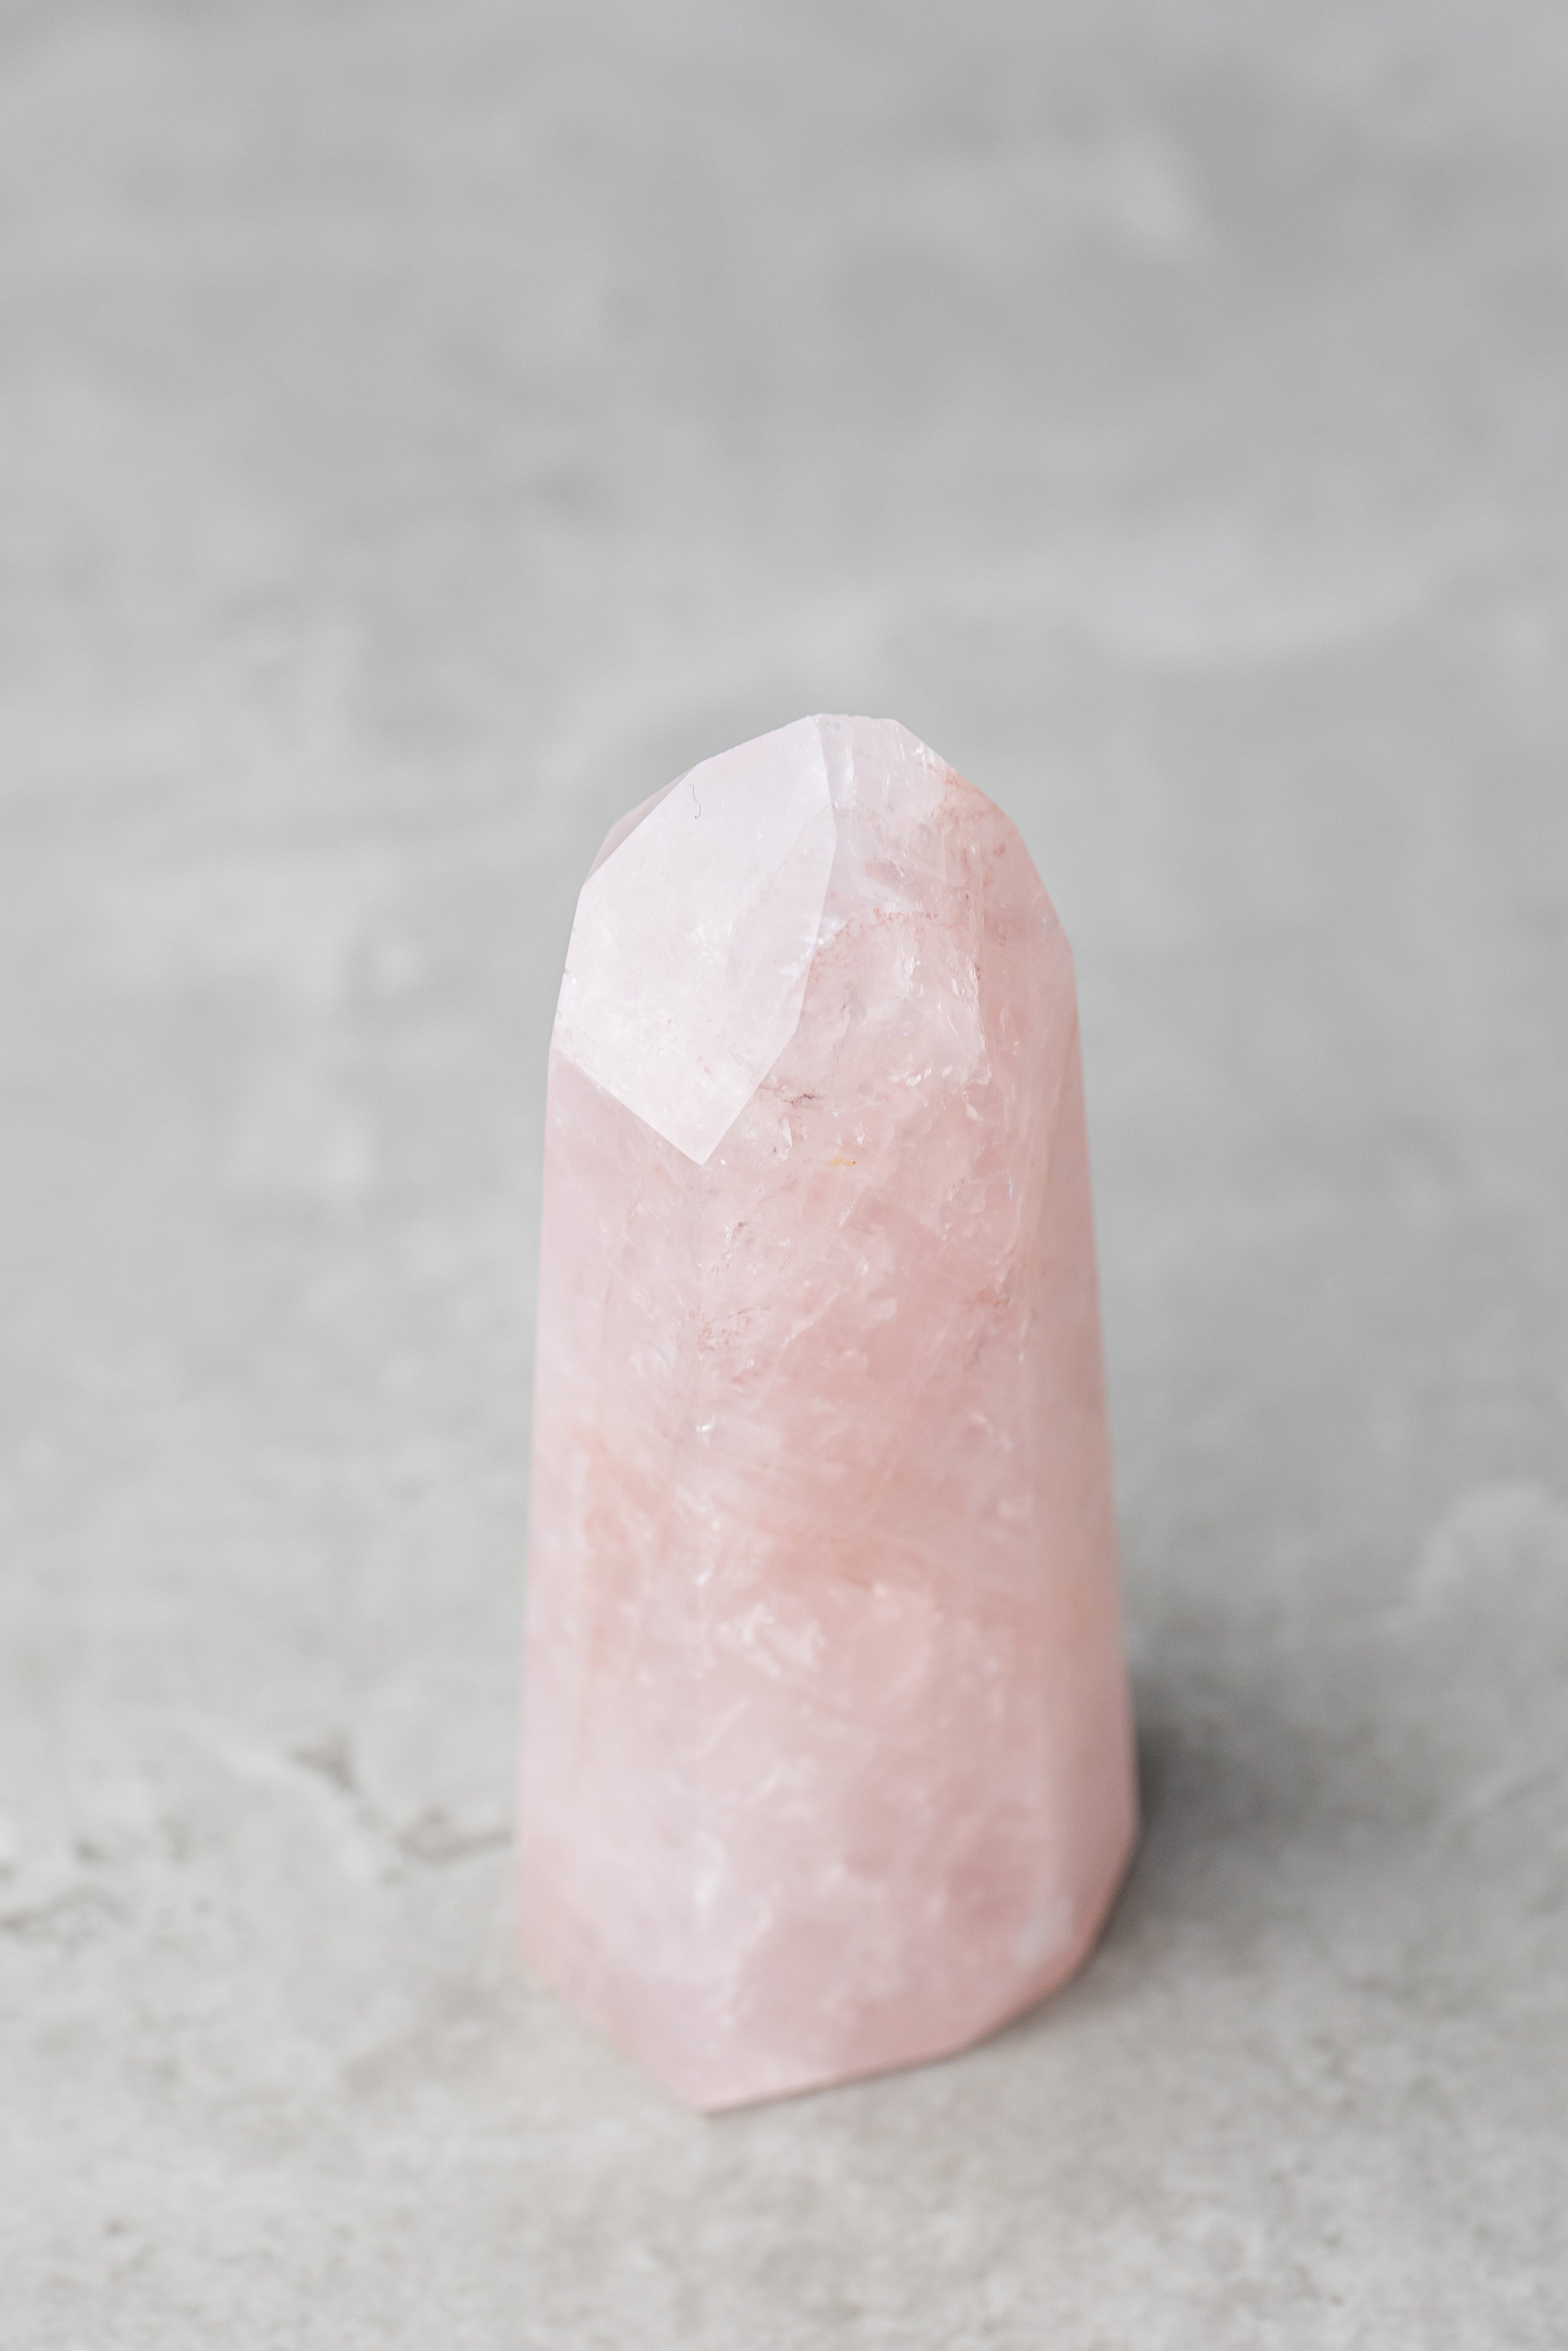 Rose Quartz Point - Love-Attracting Crystal for Heart Chakra & Emotional Healing - Everyday Rocks